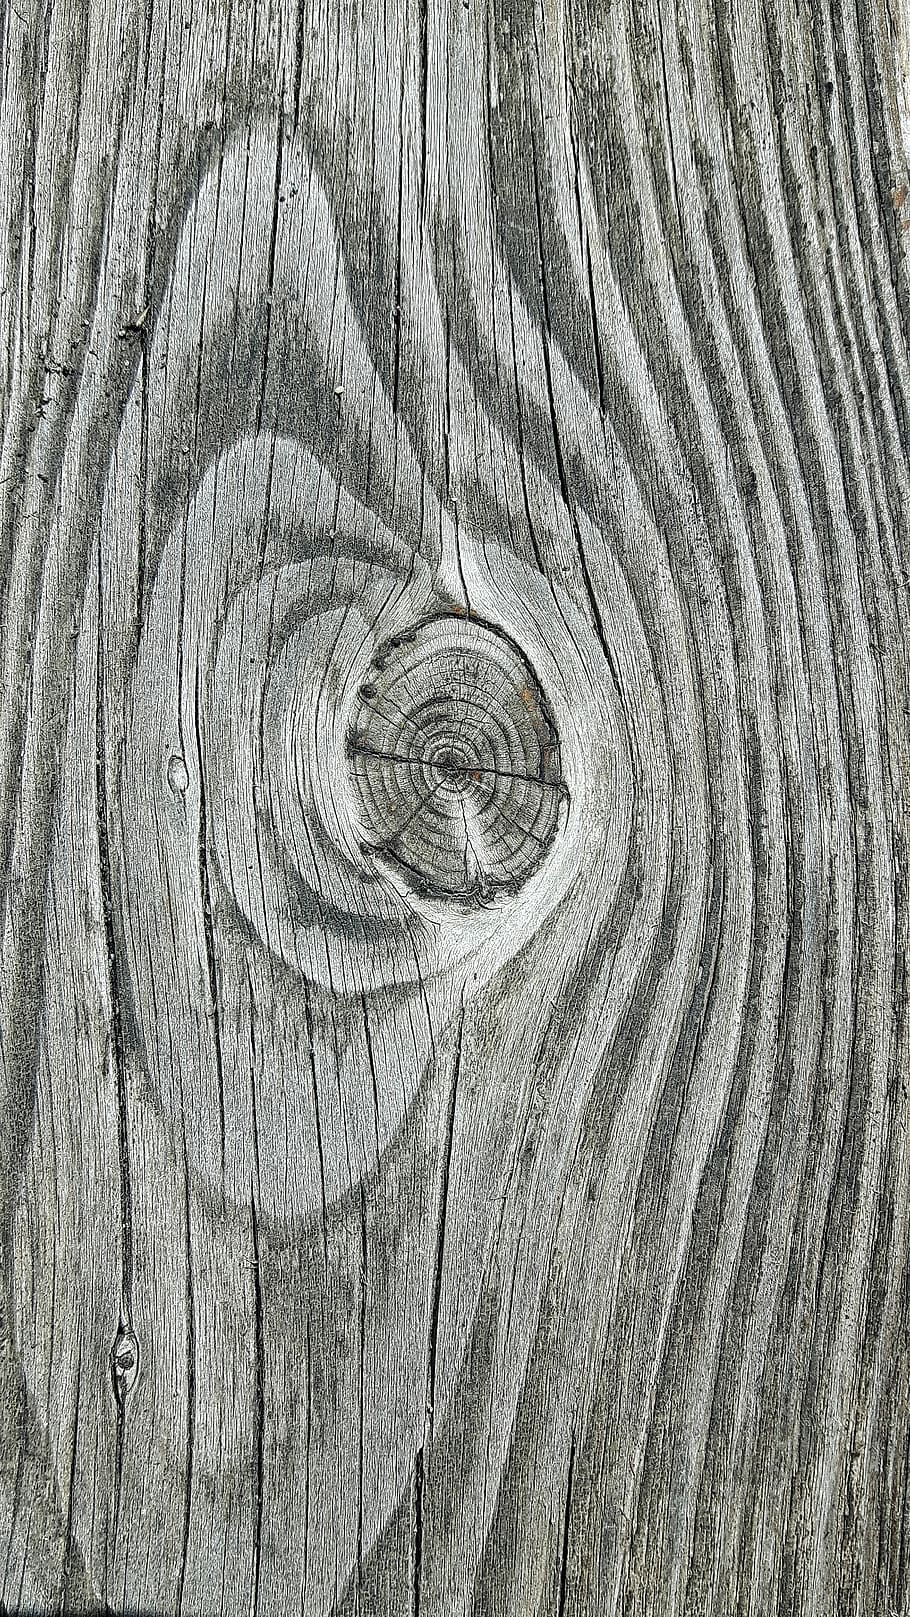 wood, node, texture, plant, door, old, wood - material, textured, tree, full frame